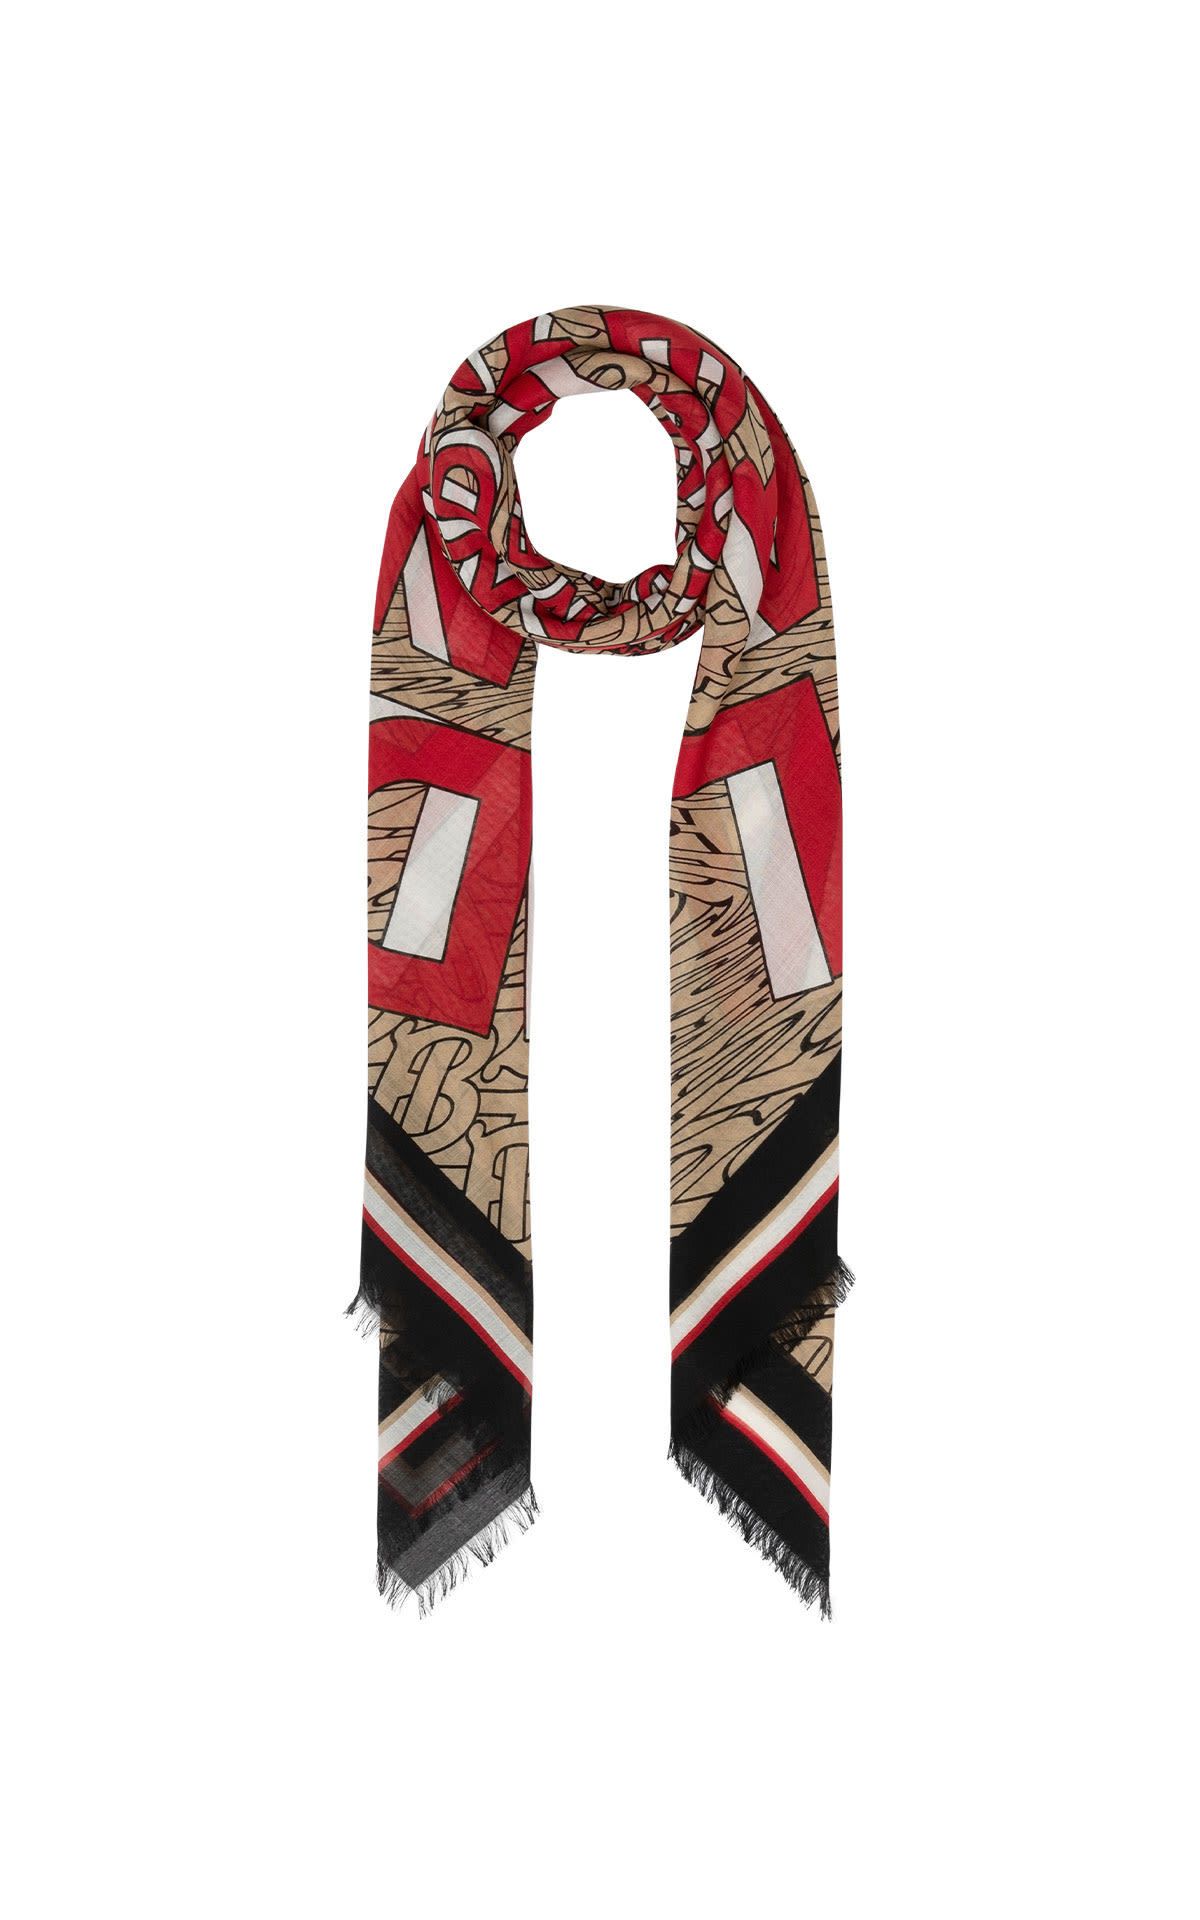 Burberry Burberry text scarf from Bicester Village